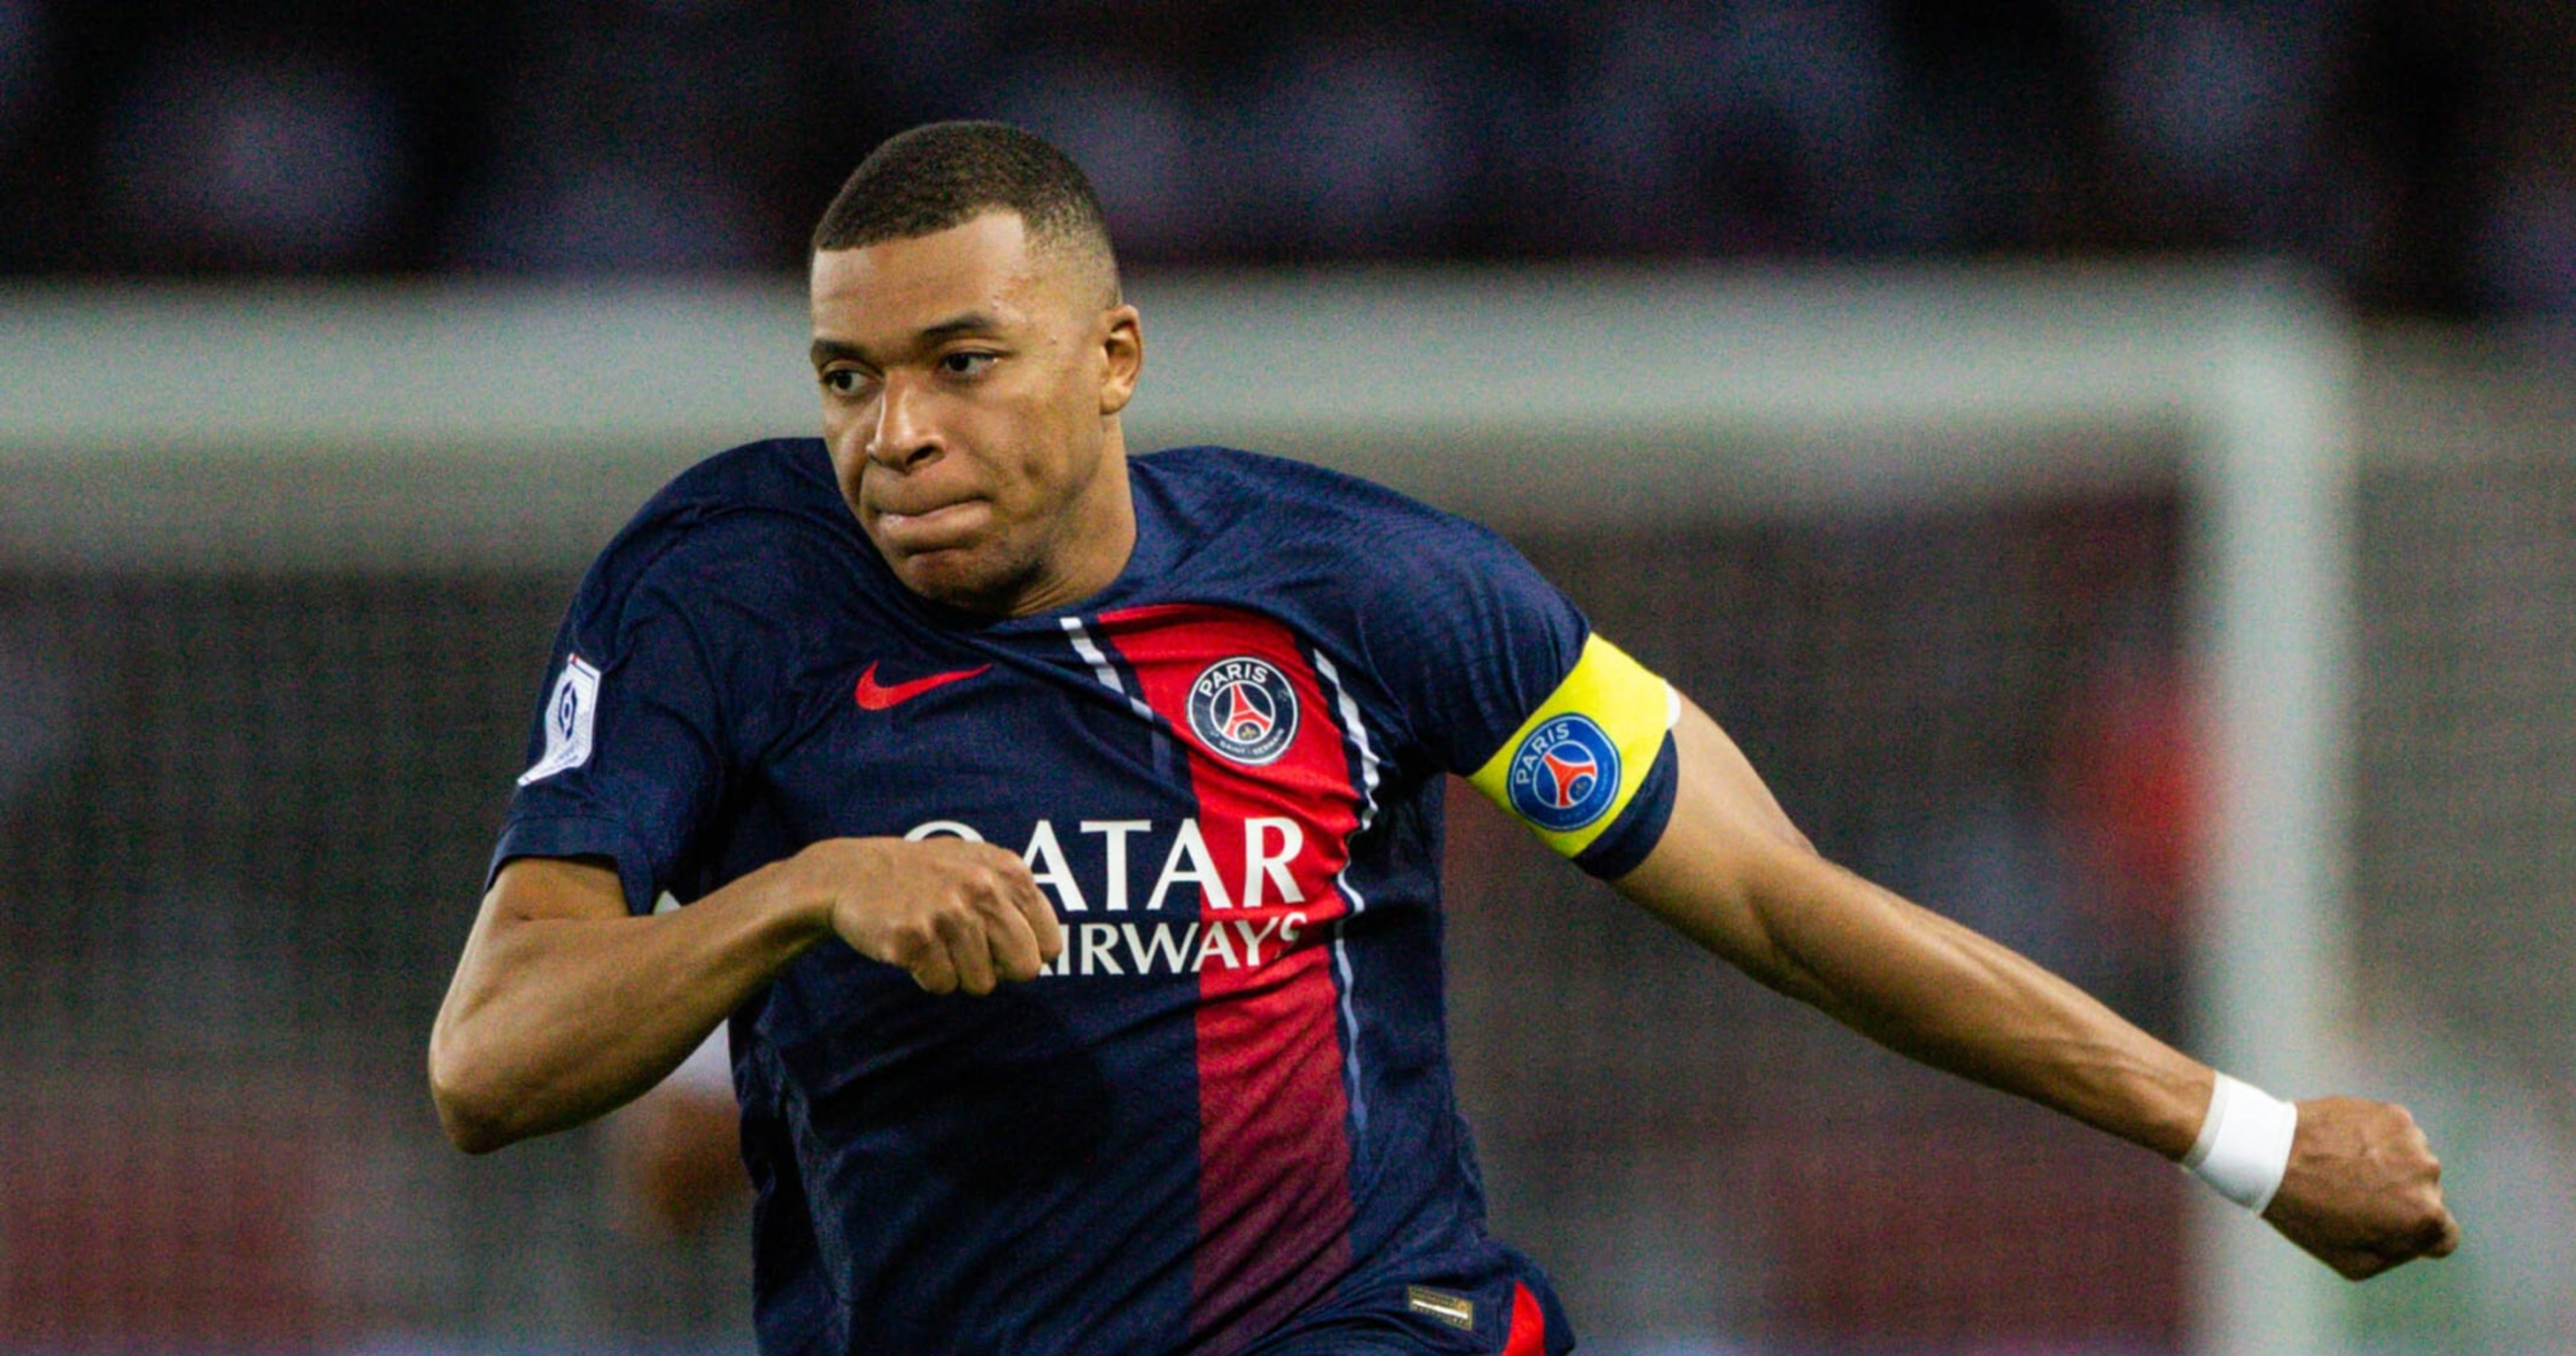 Kylian Mbappé Denies He'll Leave PSG in 2023 amid Real Madrid, Contract